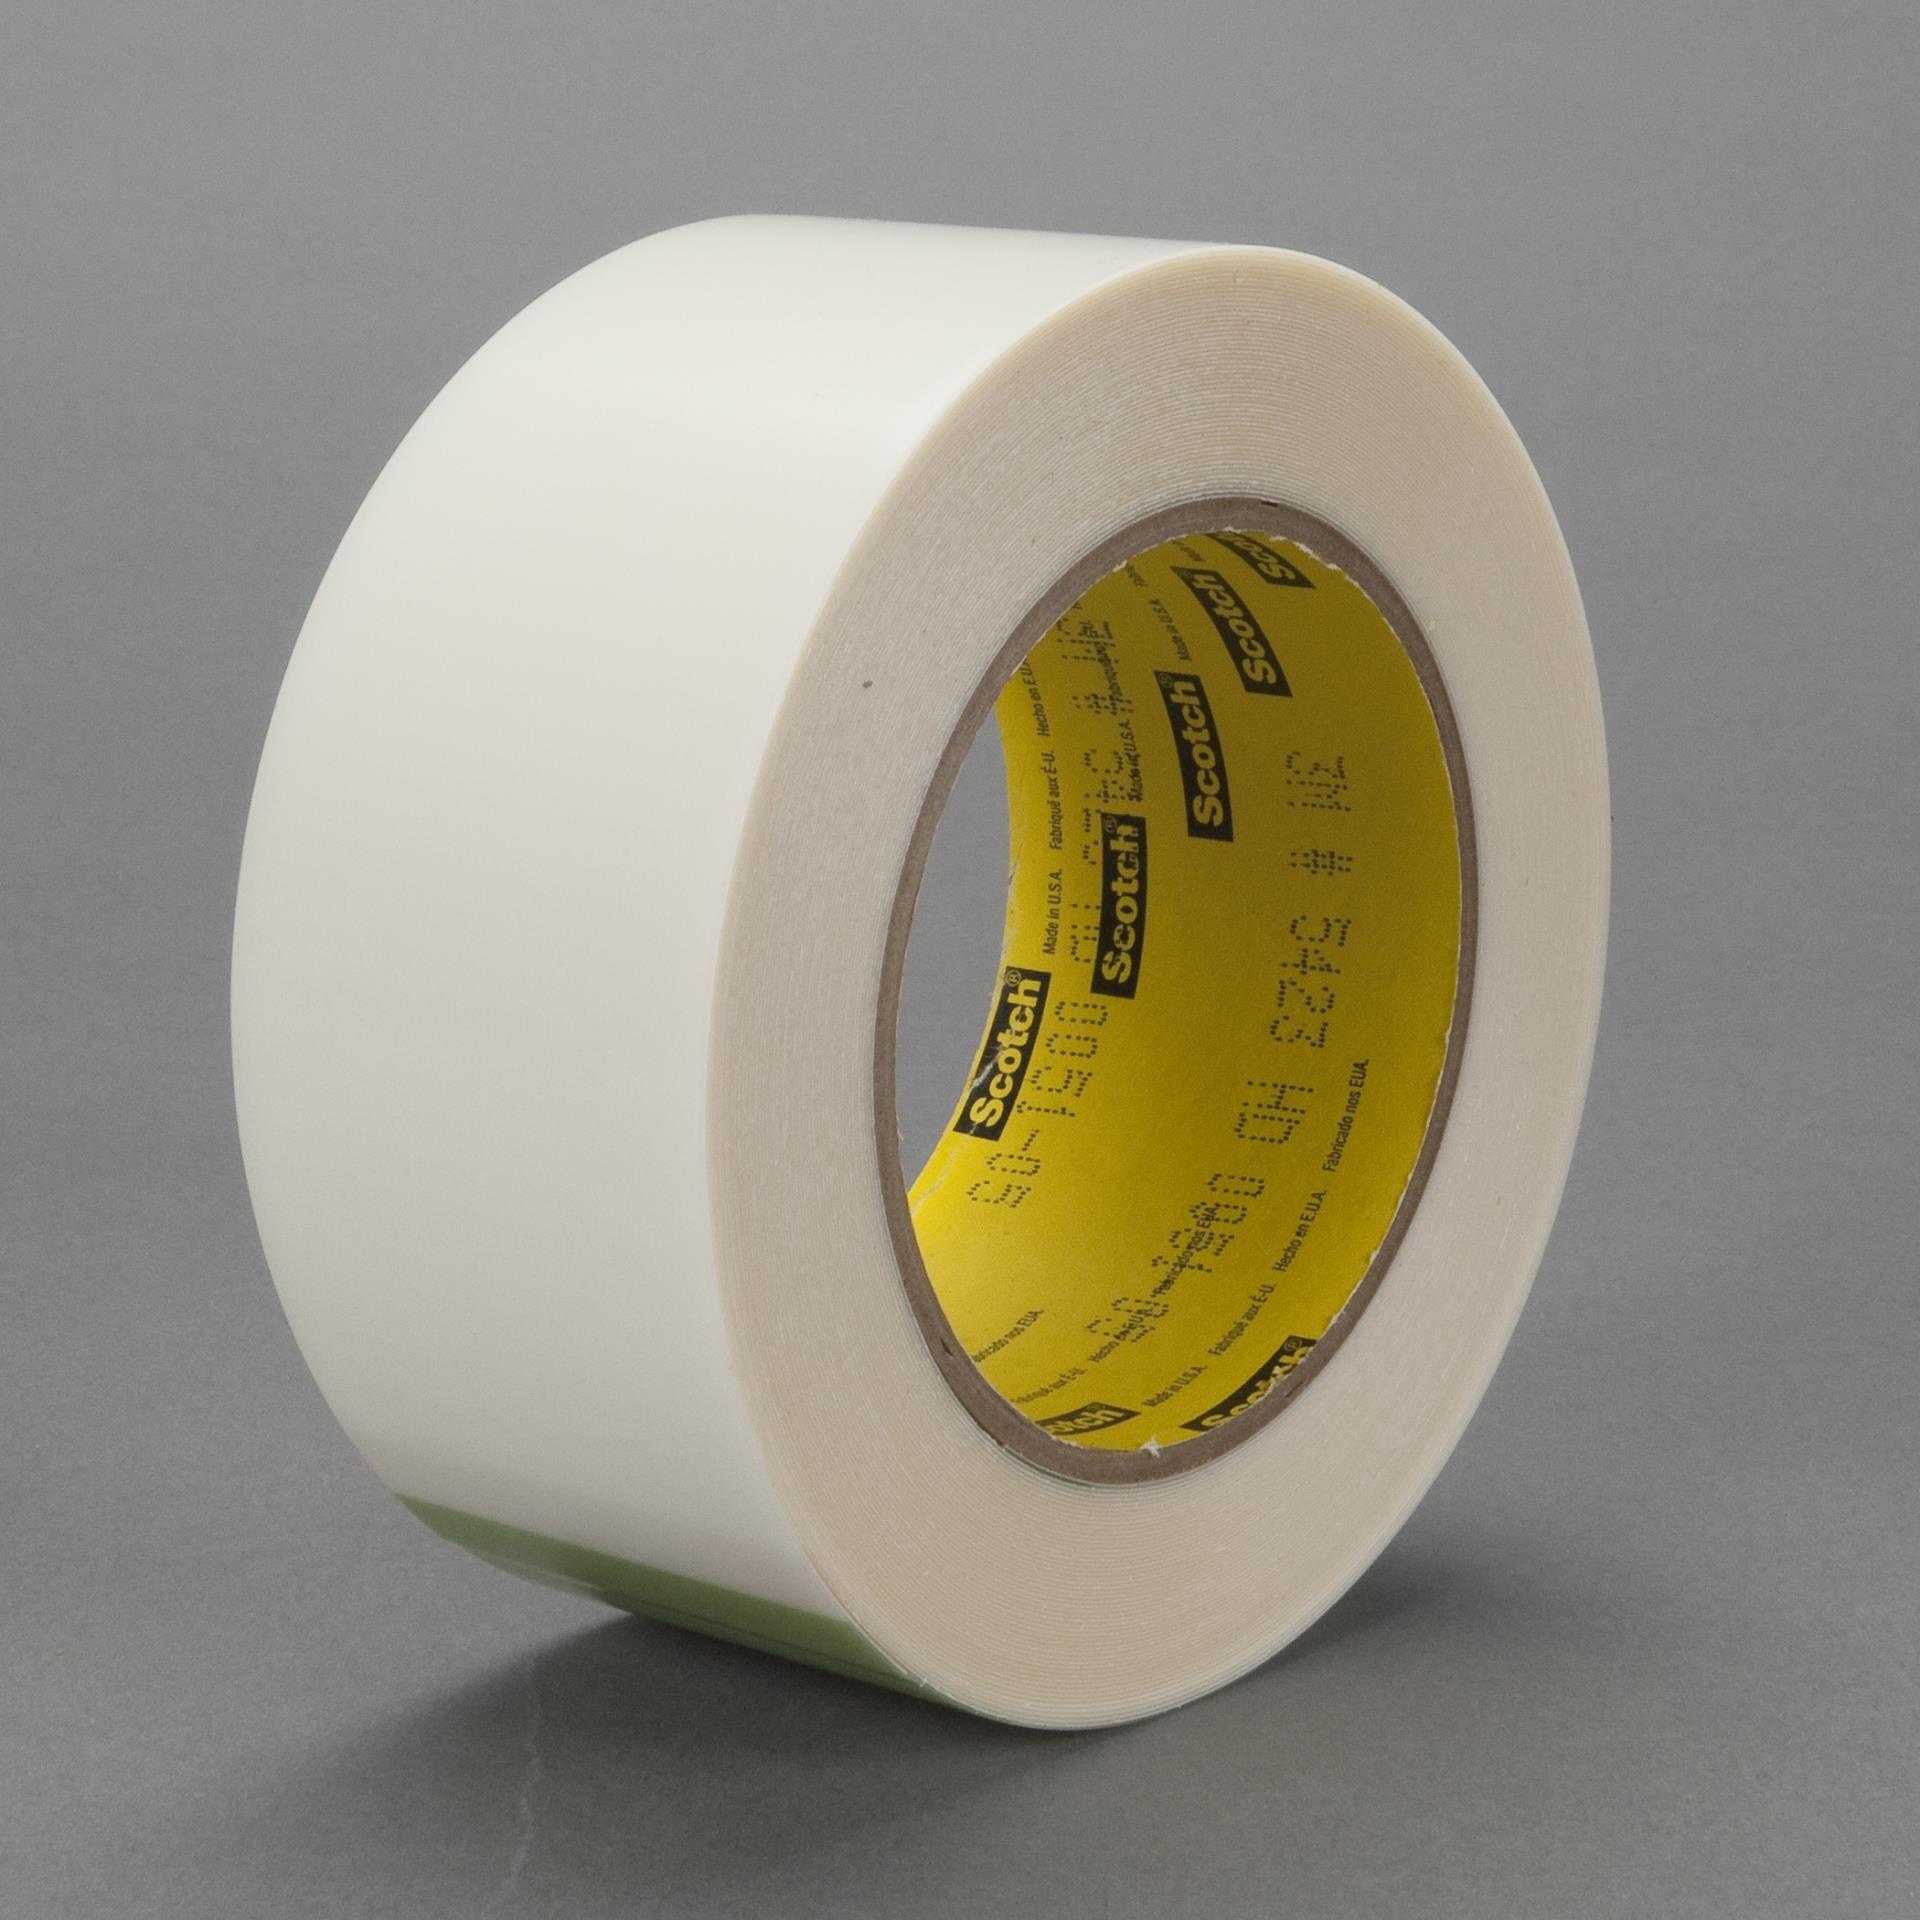 3M 56 Yellow Polyester Film Electrical Tape 1 roll 0.94" width x 72yd length 